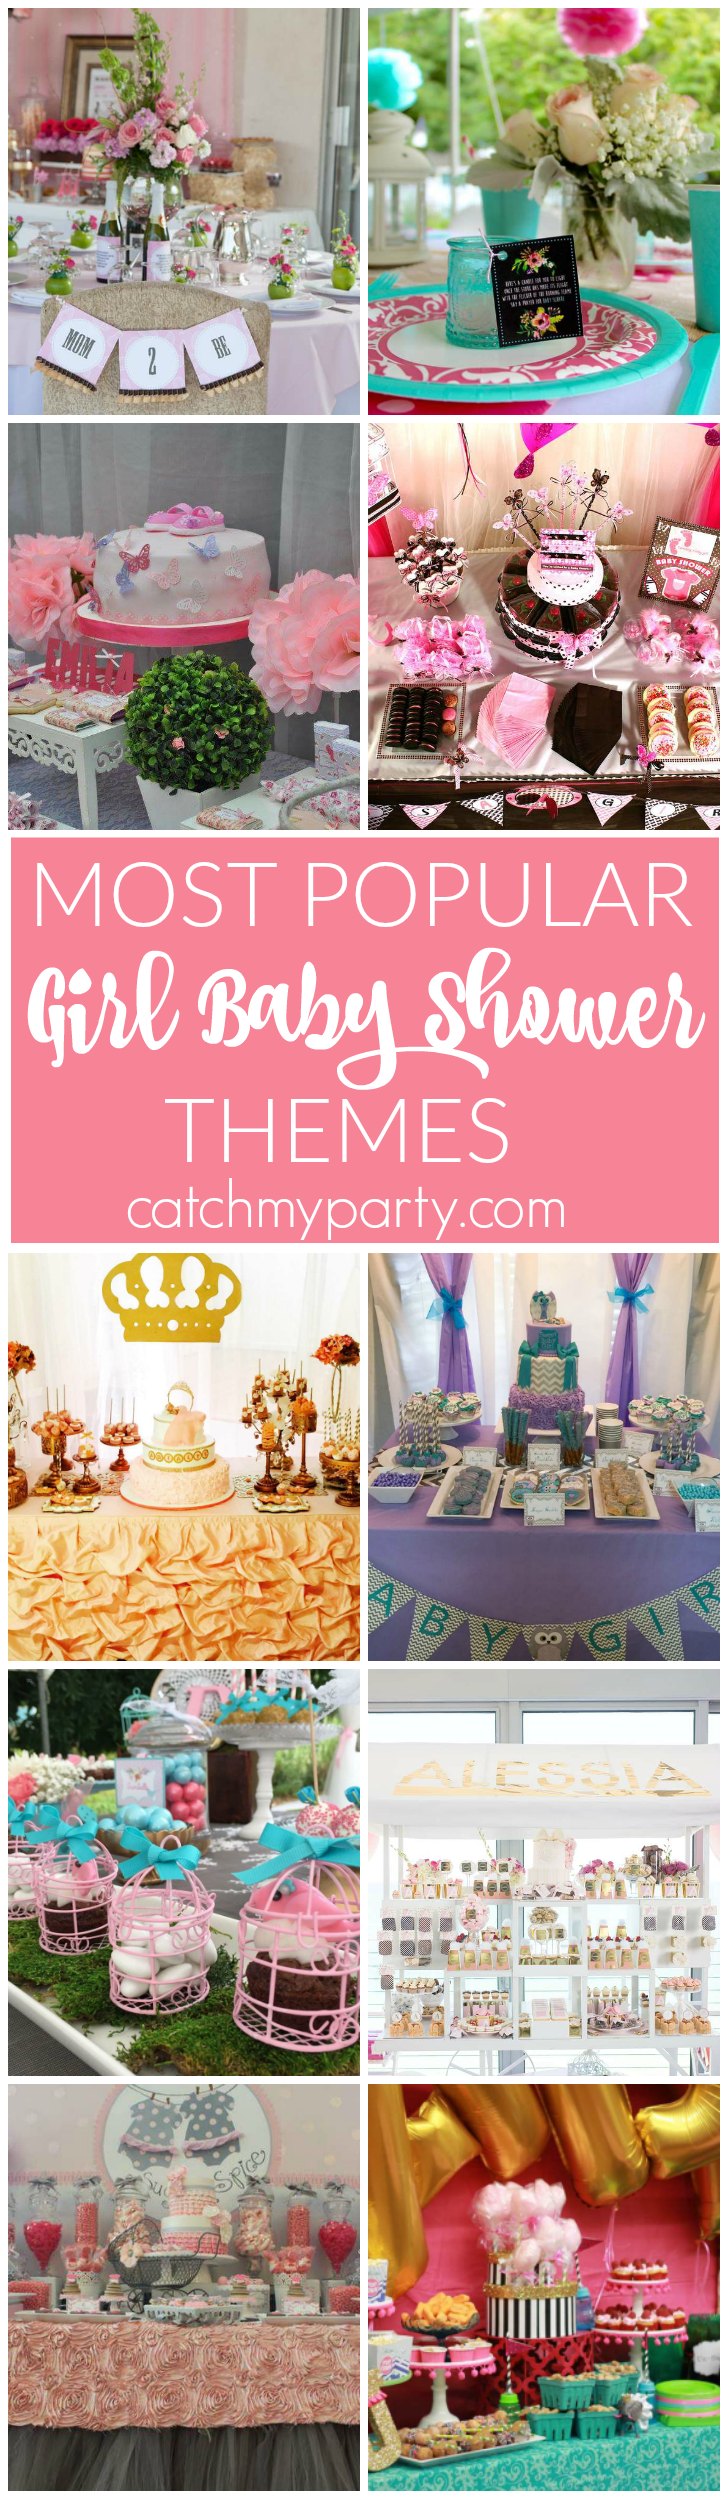 character baby shower themes